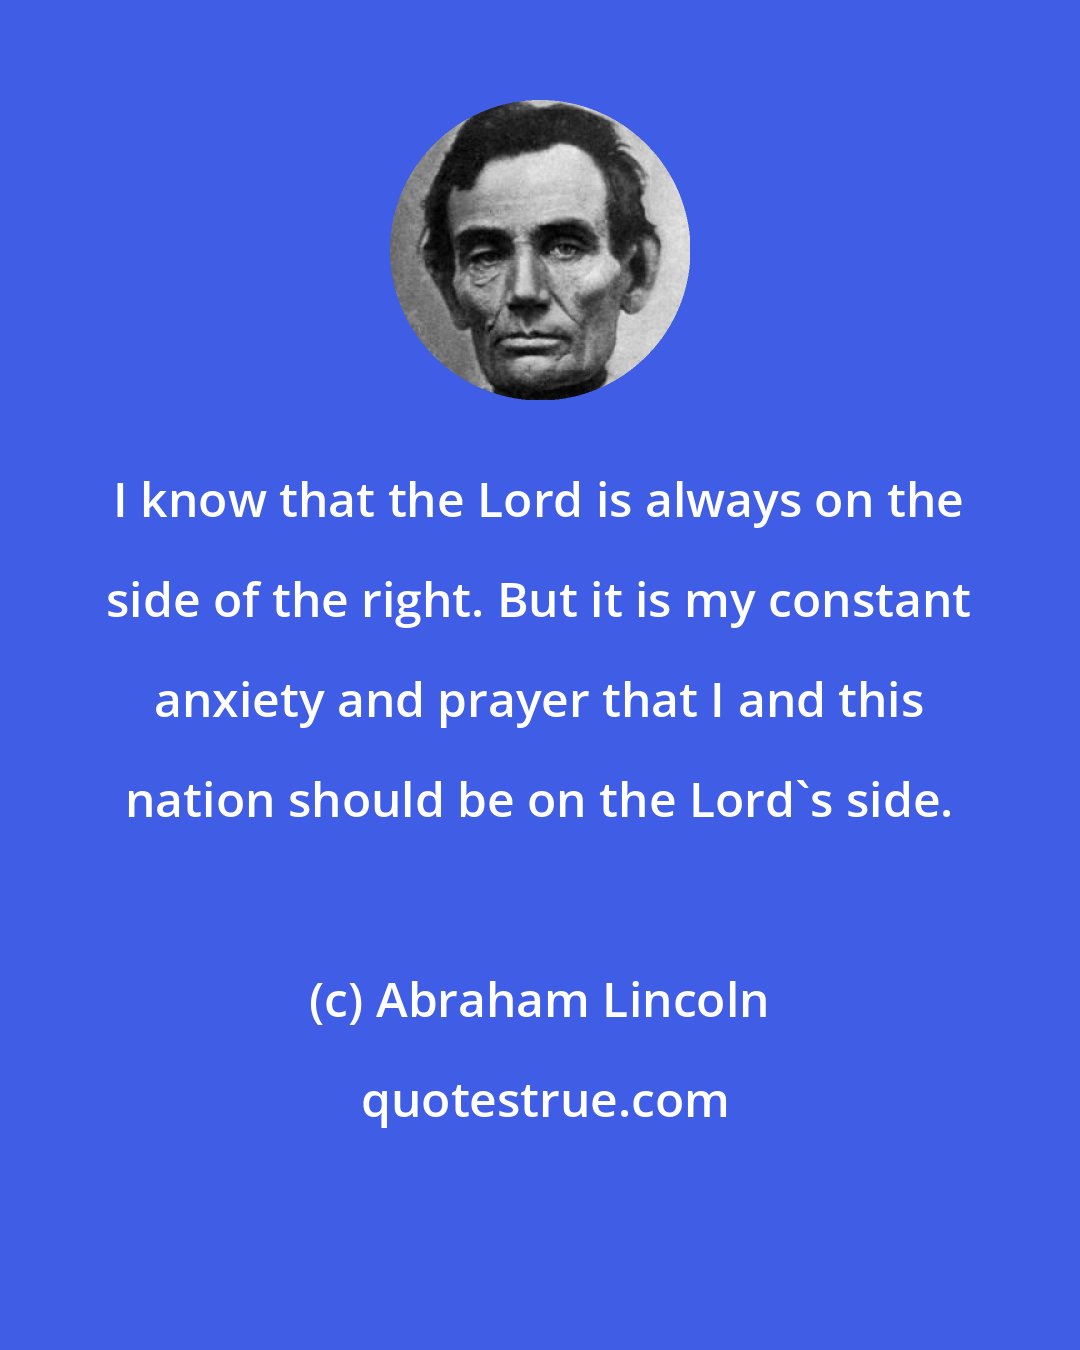 Abraham Lincoln: I know that the Lord is always on the side of the right. But it is my constant anxiety and prayer that I and this nation should be on the Lord's side.